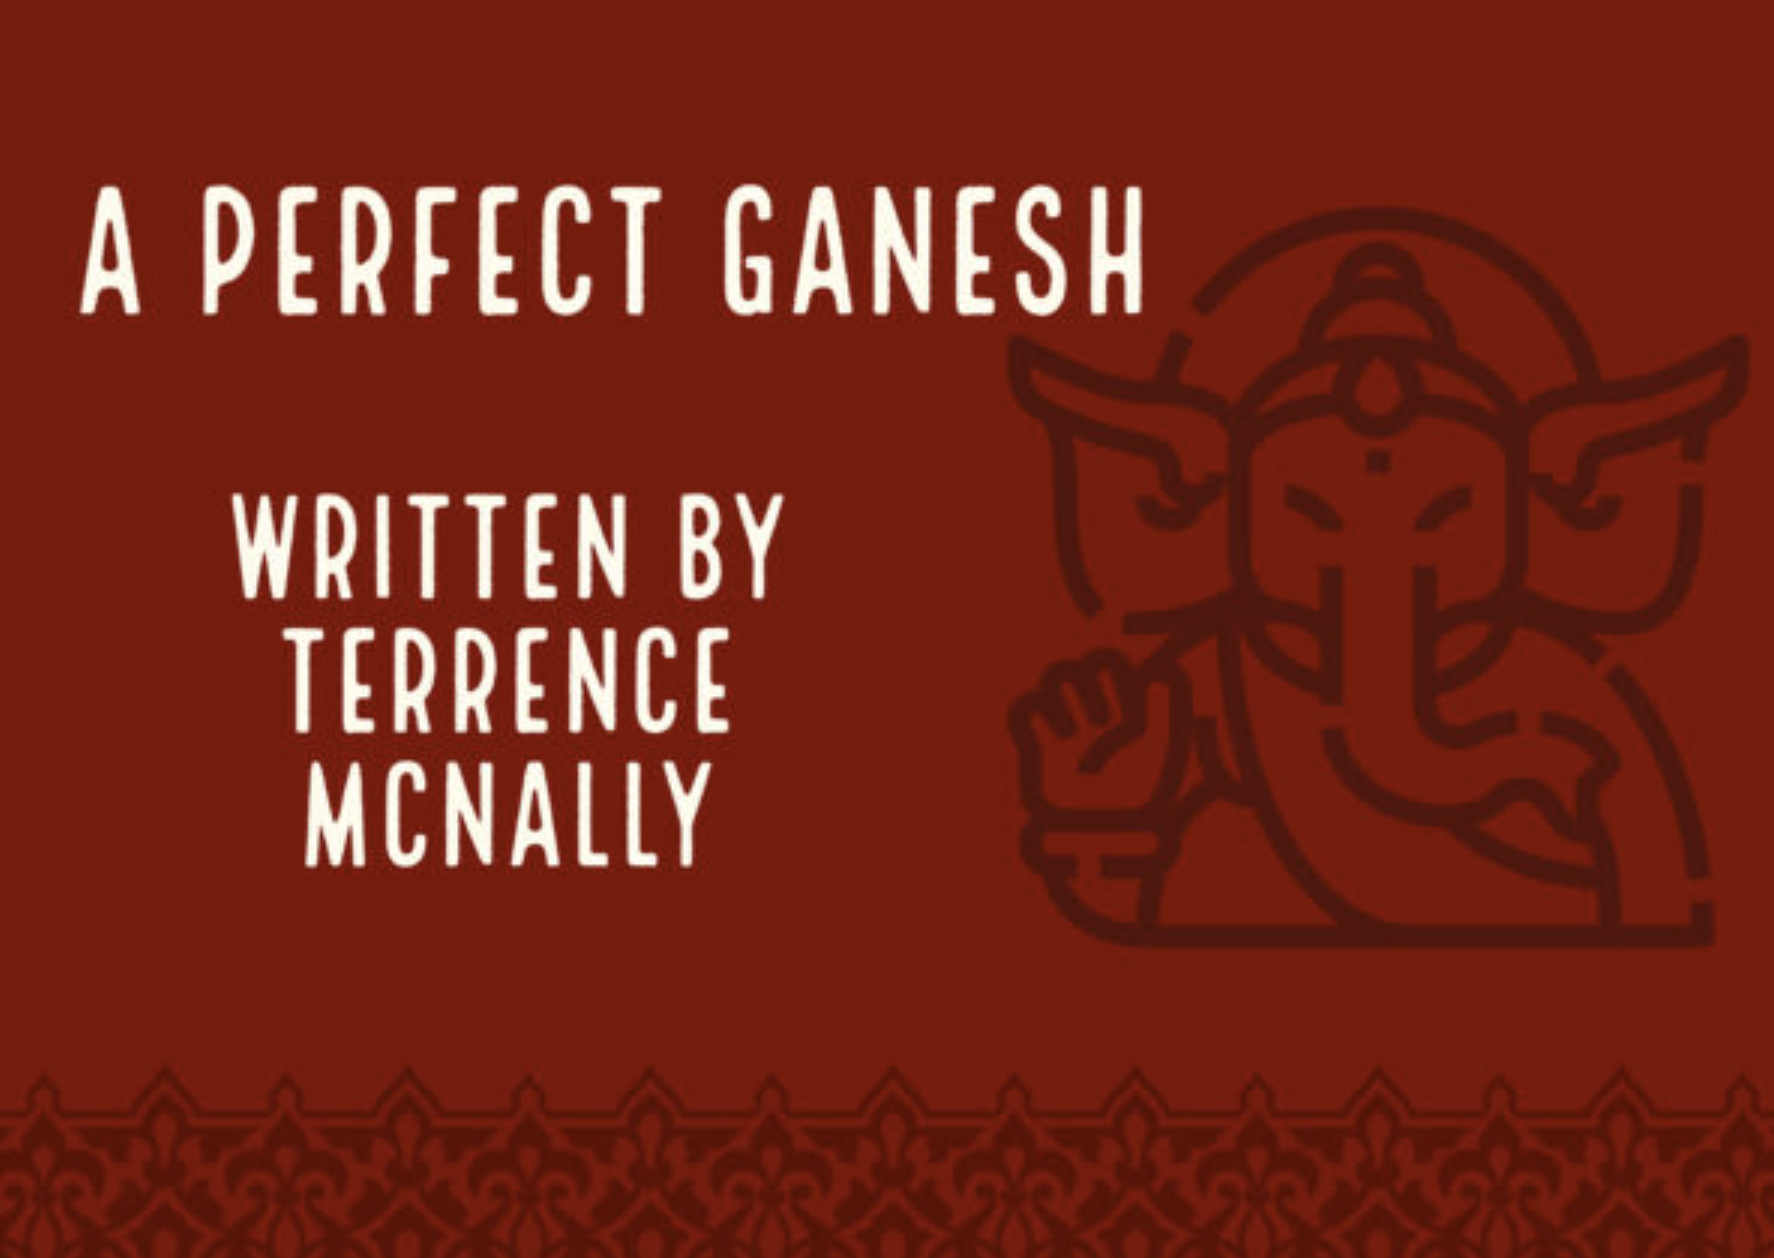 A Perfect Ganesh, a play by Terrence McNally